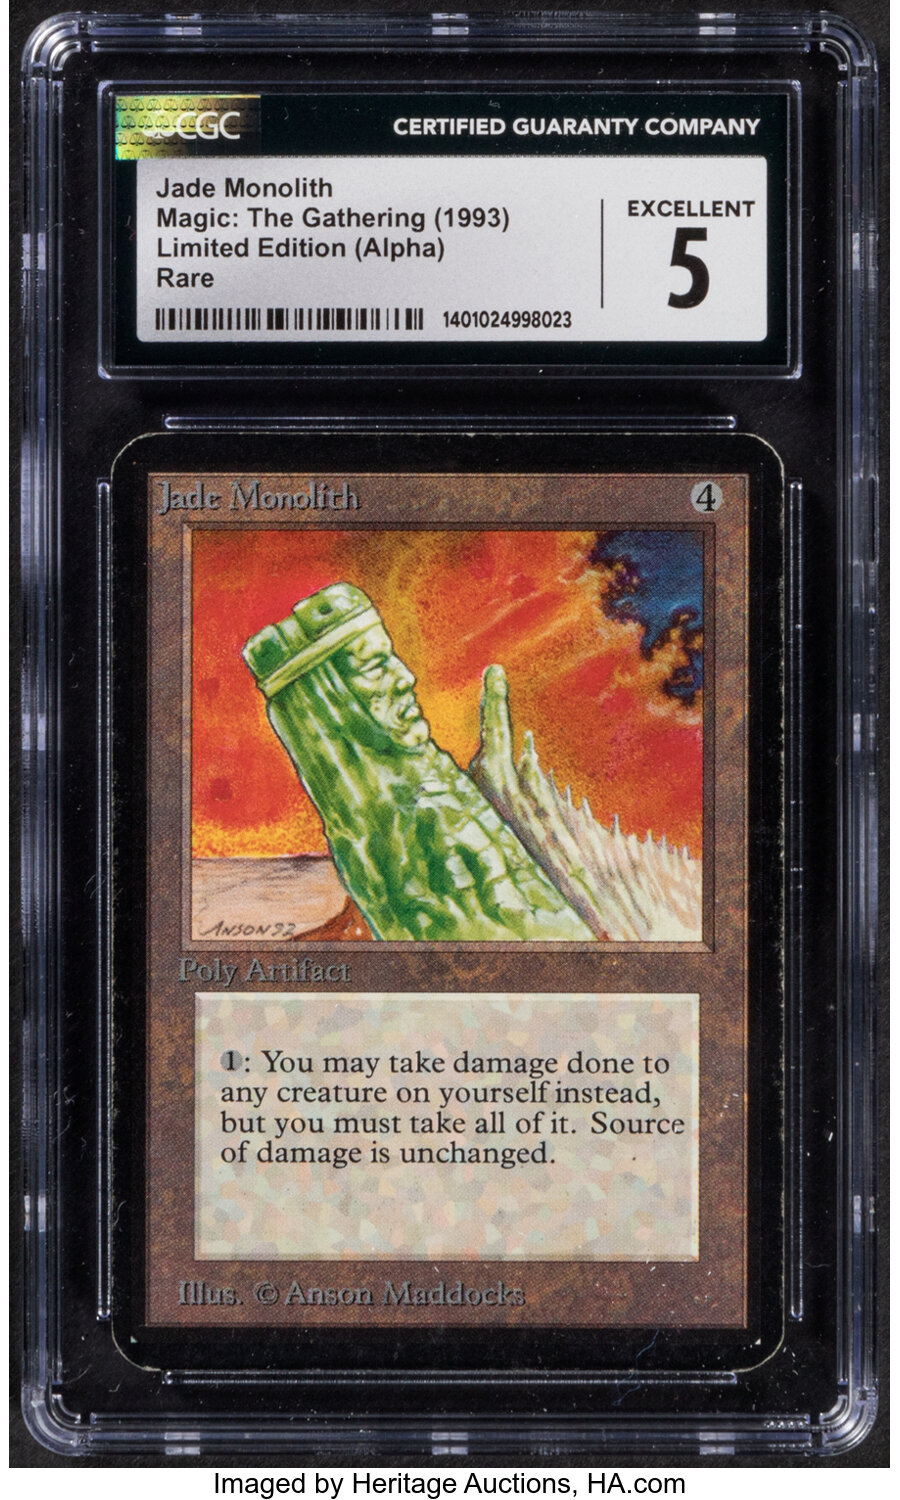 Magic: The Gathering Jade Monolith Limited Edition (Alpha) CGC Trading Card Game Excellent 5 (Wizards of the Coast, 1993) Rare